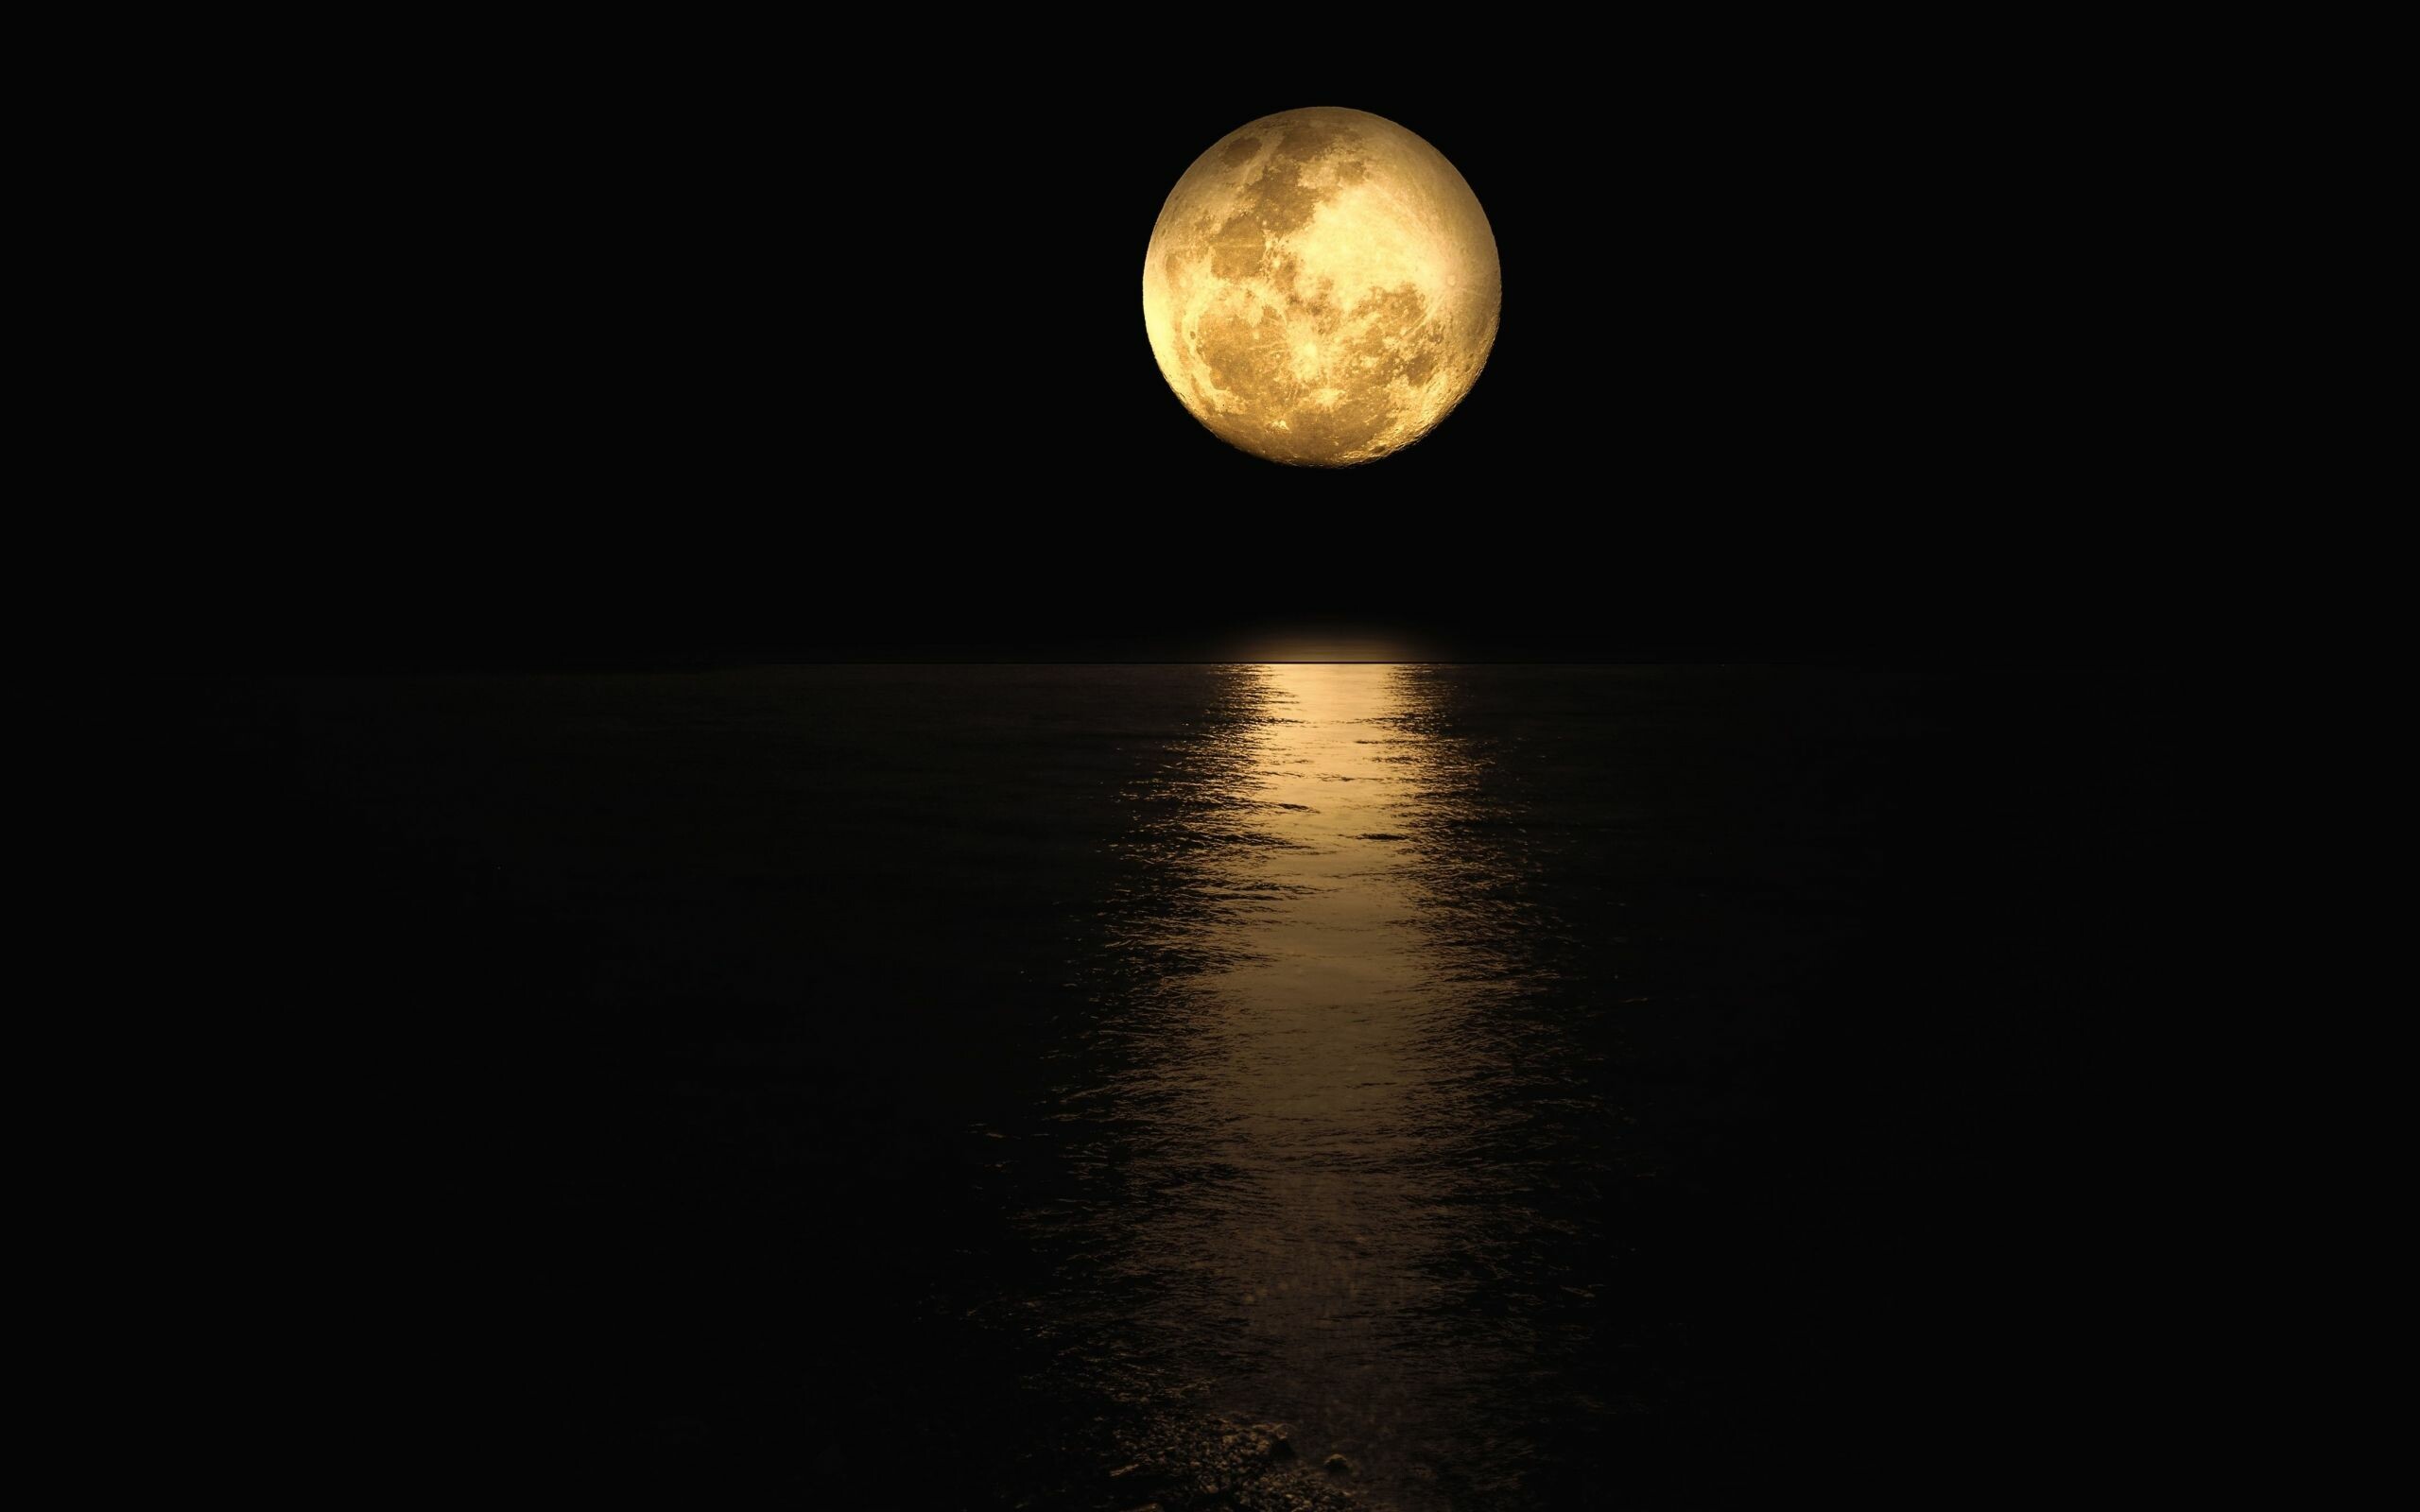 Moonlight: The broad expanse of water reflecting the moon, Midnight. 2560x1600 HD Wallpaper.